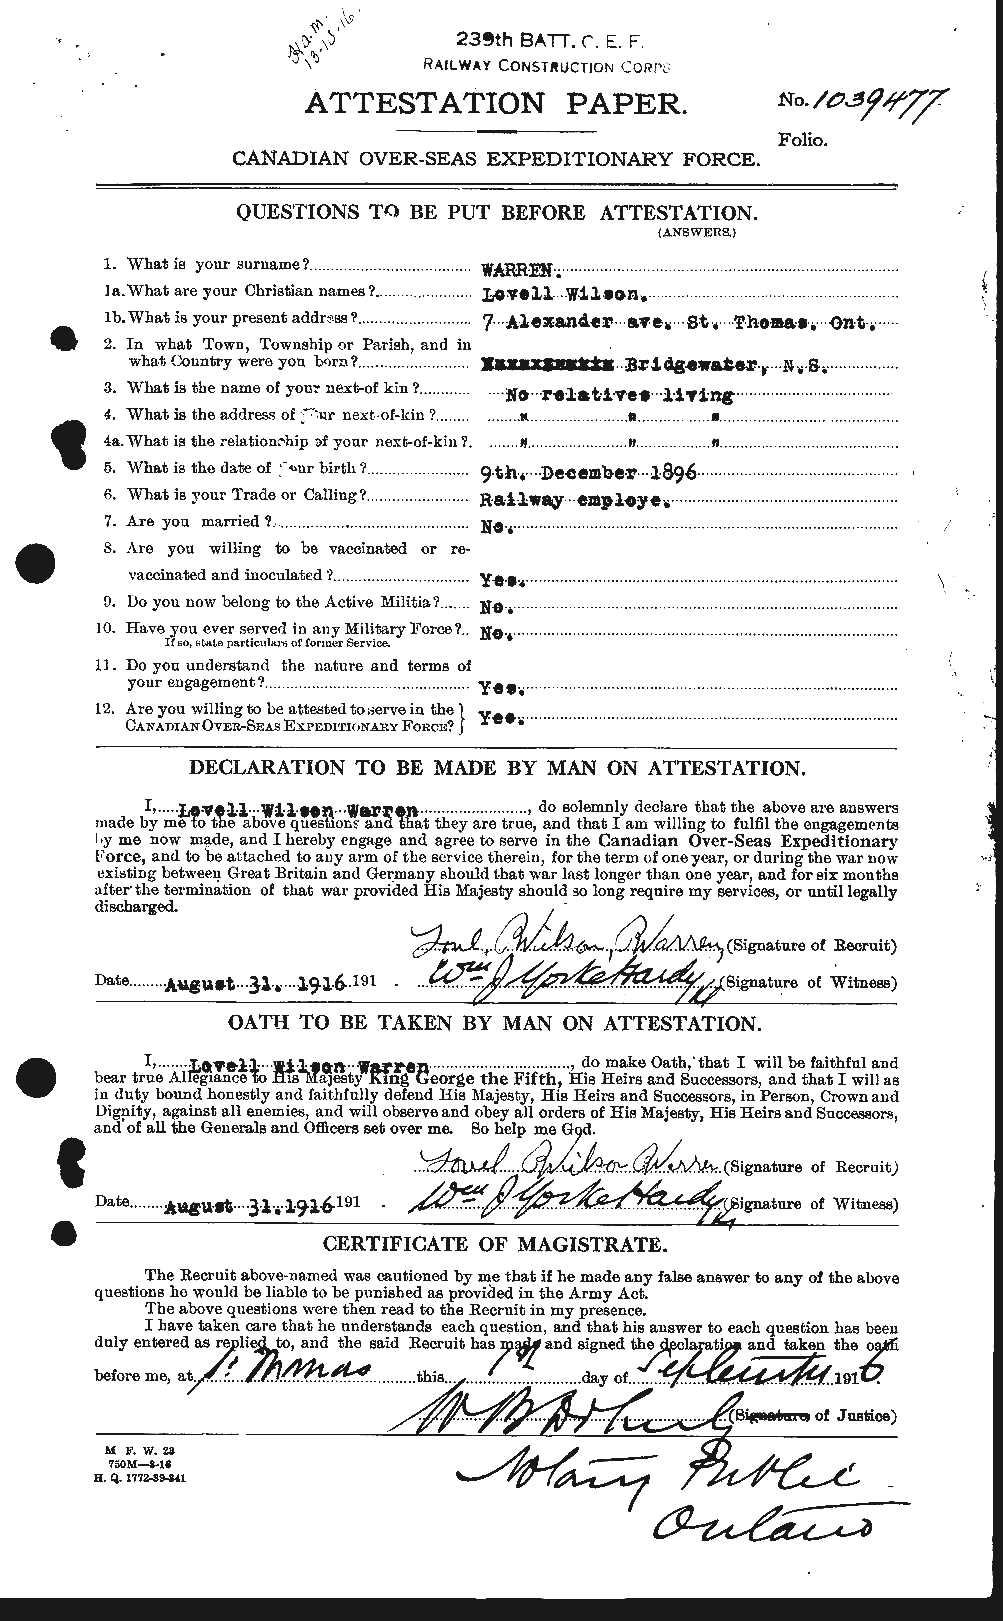 Personnel Records of the First World War - CEF 658595a